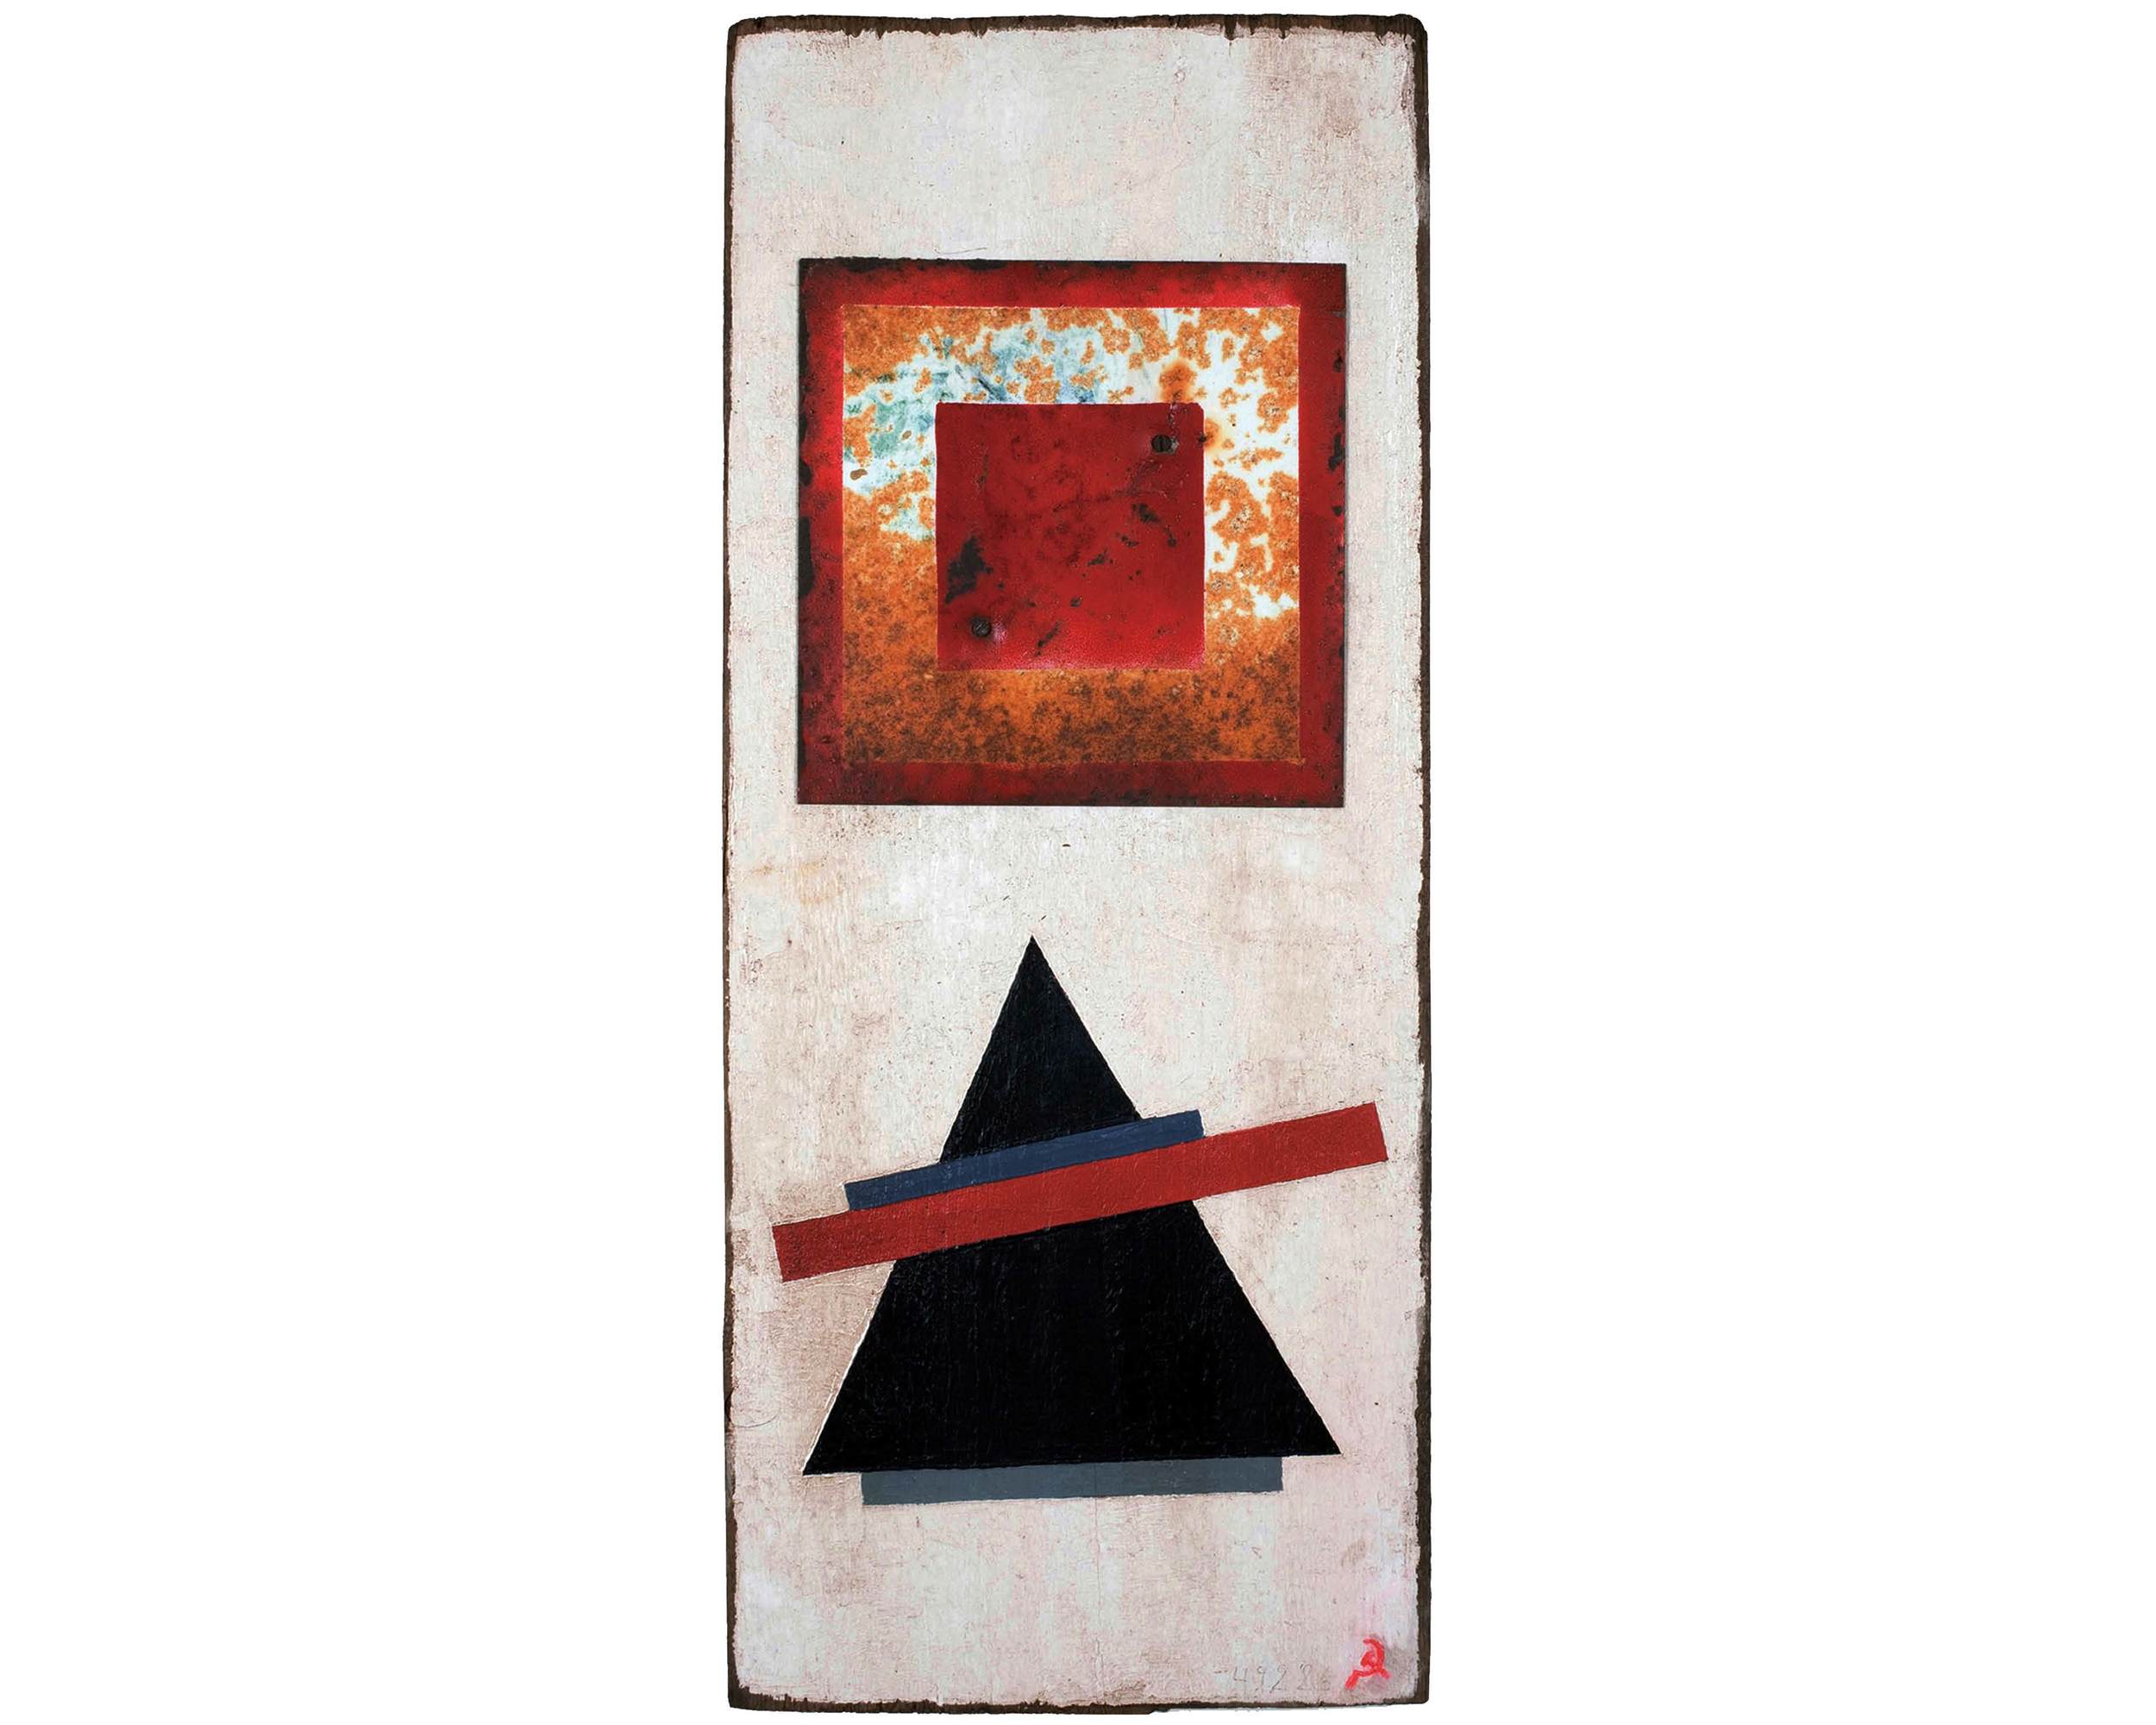   Unattributed. Unsigned.&nbsp;  In the style of Ilia Chashnik. Oil and metal on wooden plank. 63.5 x 26 cm. 